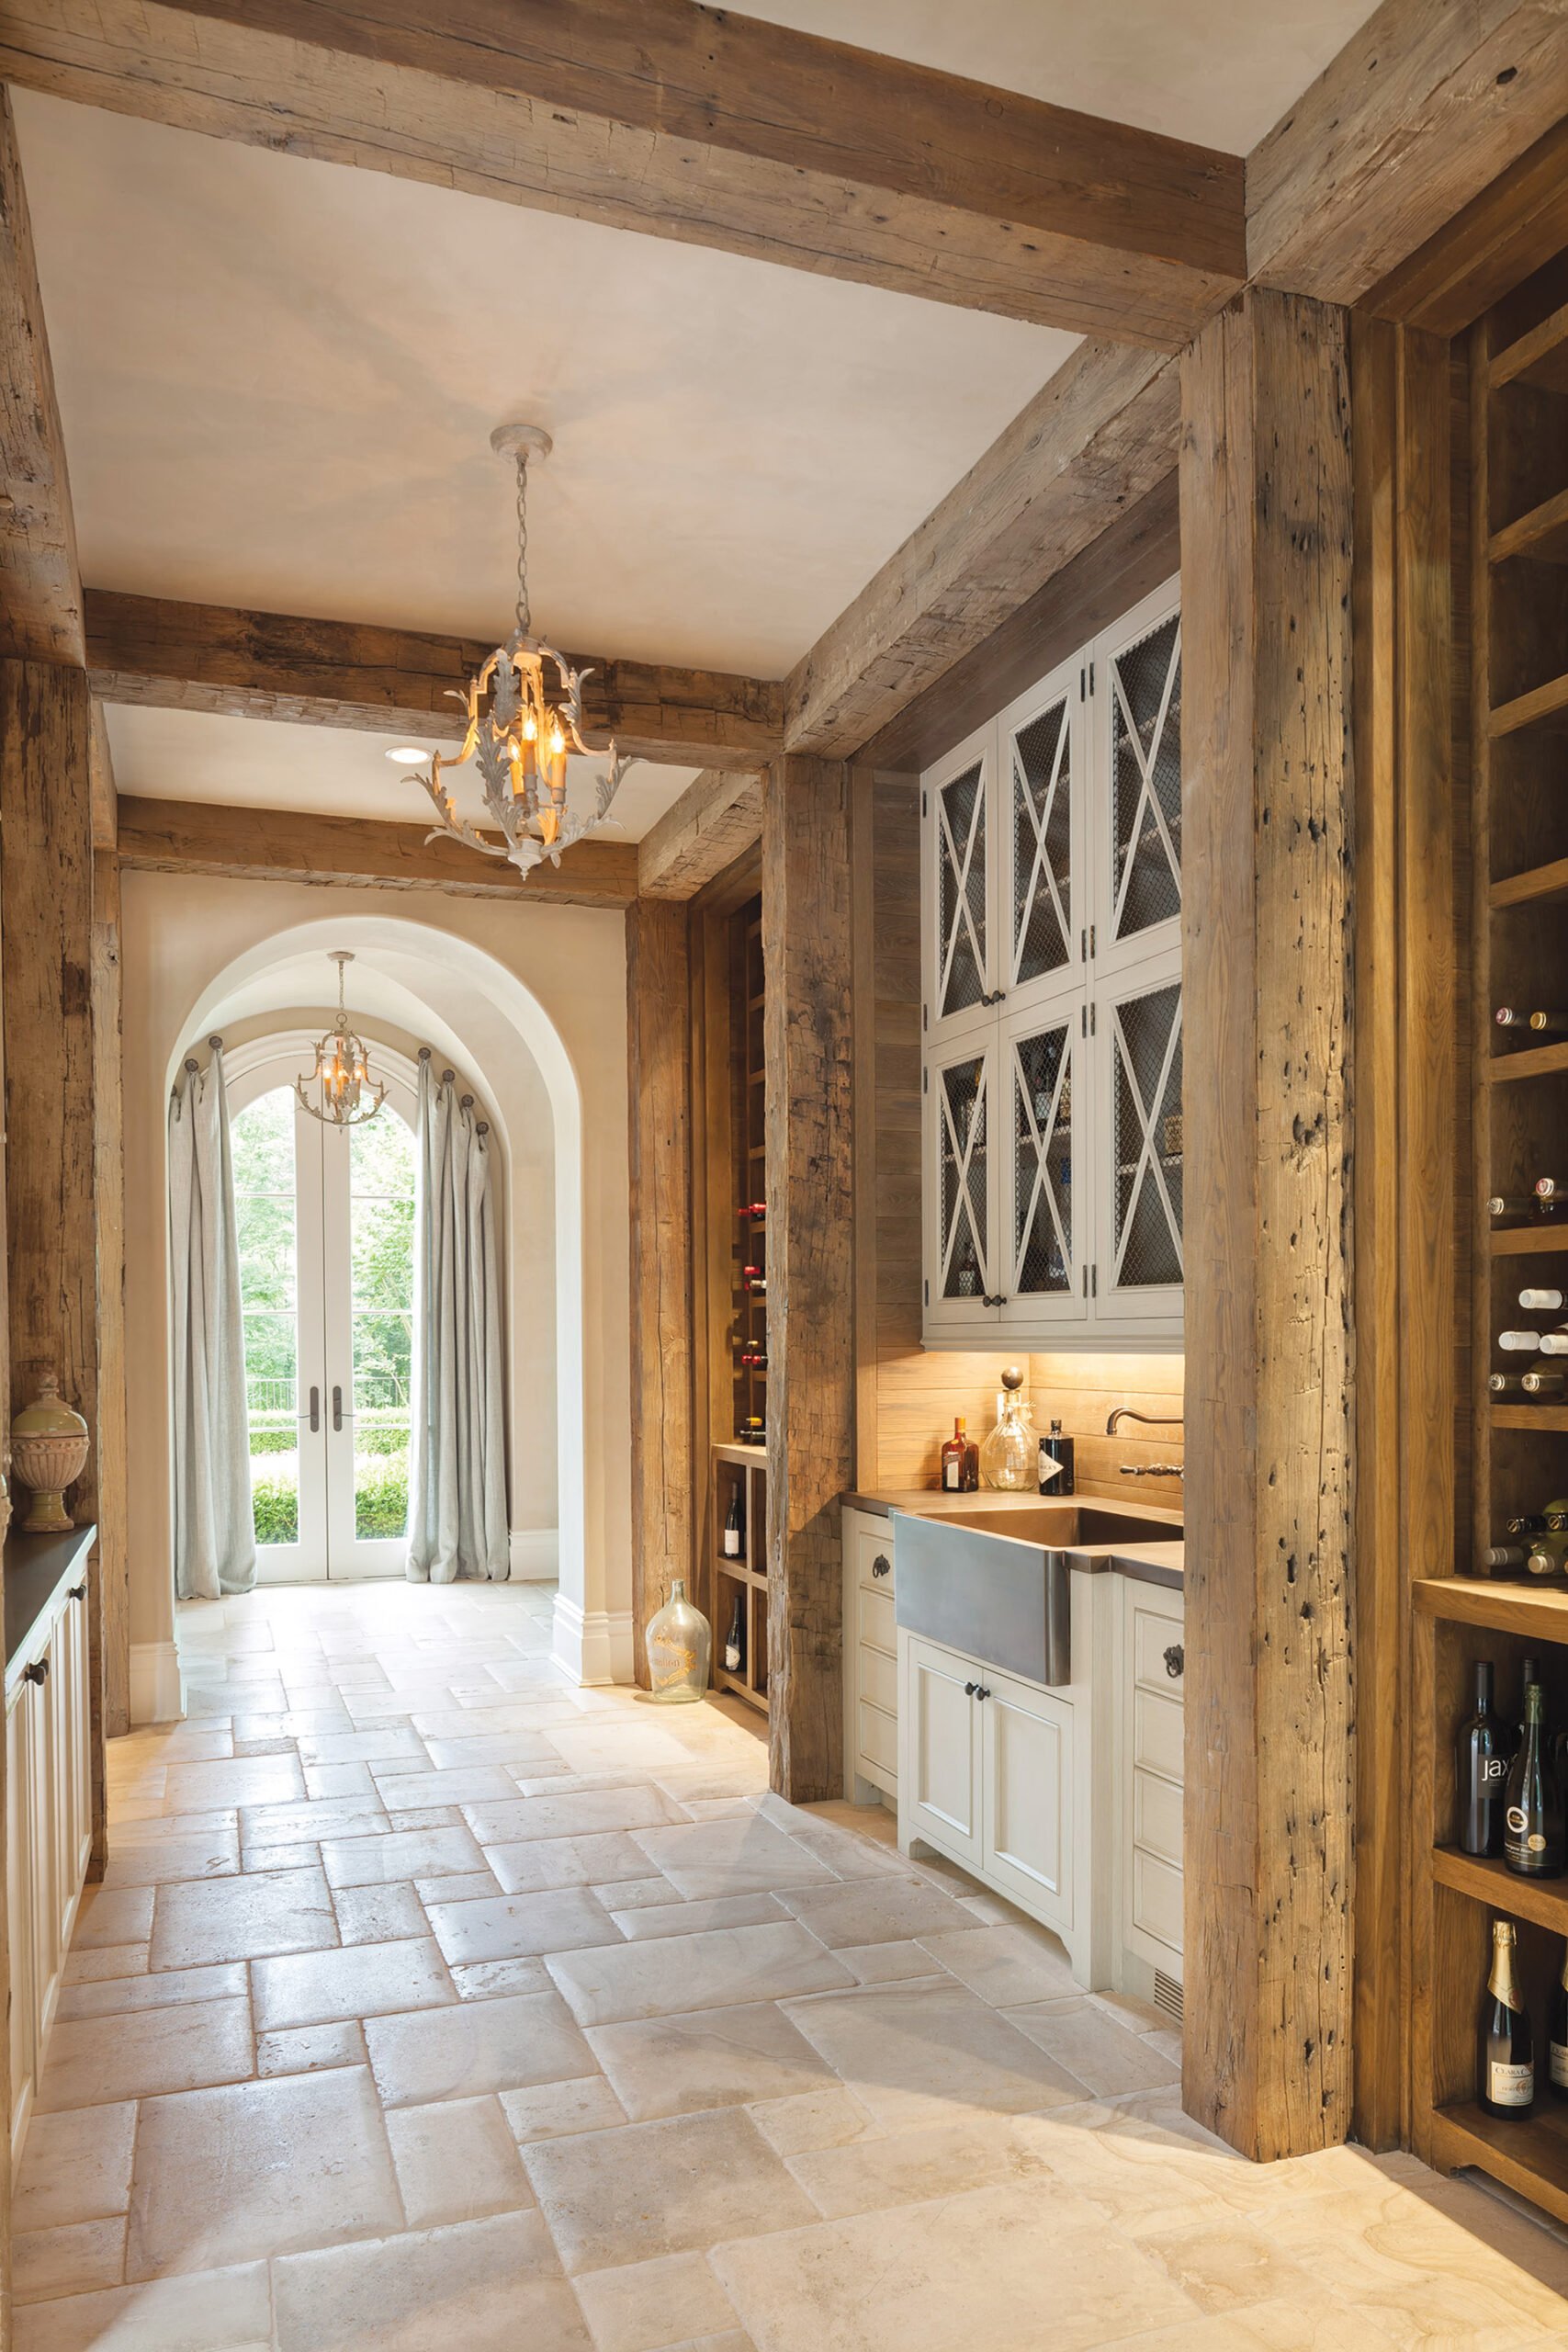 Century-old timbers enliven a bar and wine cellar tucked into a side hall.